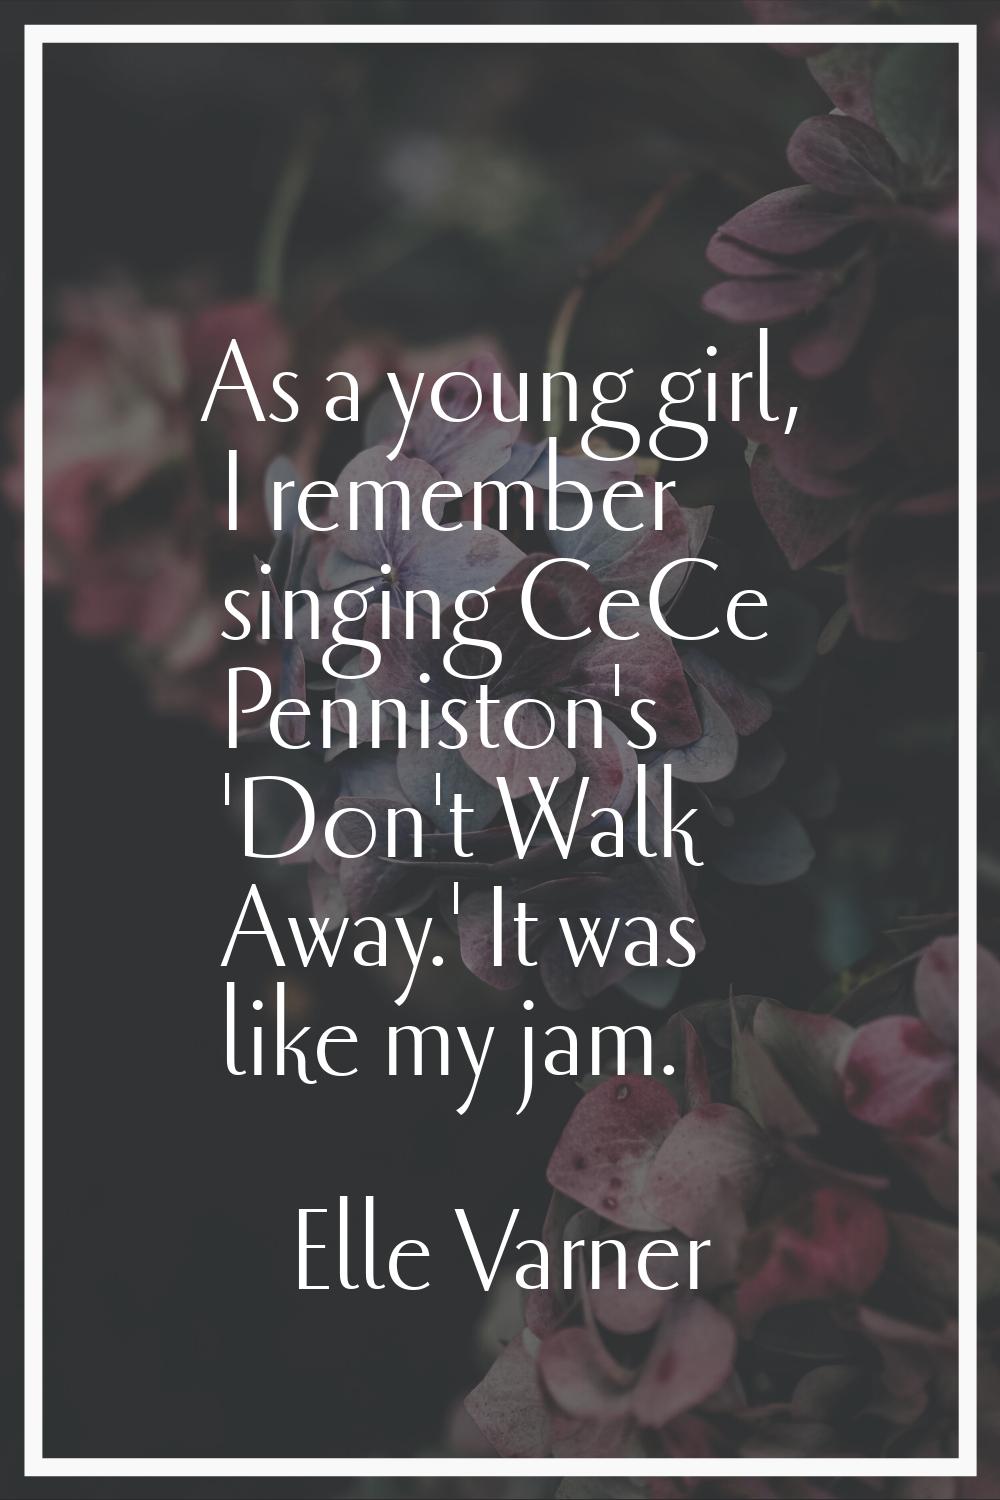 As a young girl, I remember singing CeCe Penniston's 'Don't Walk Away.' It was like my jam.